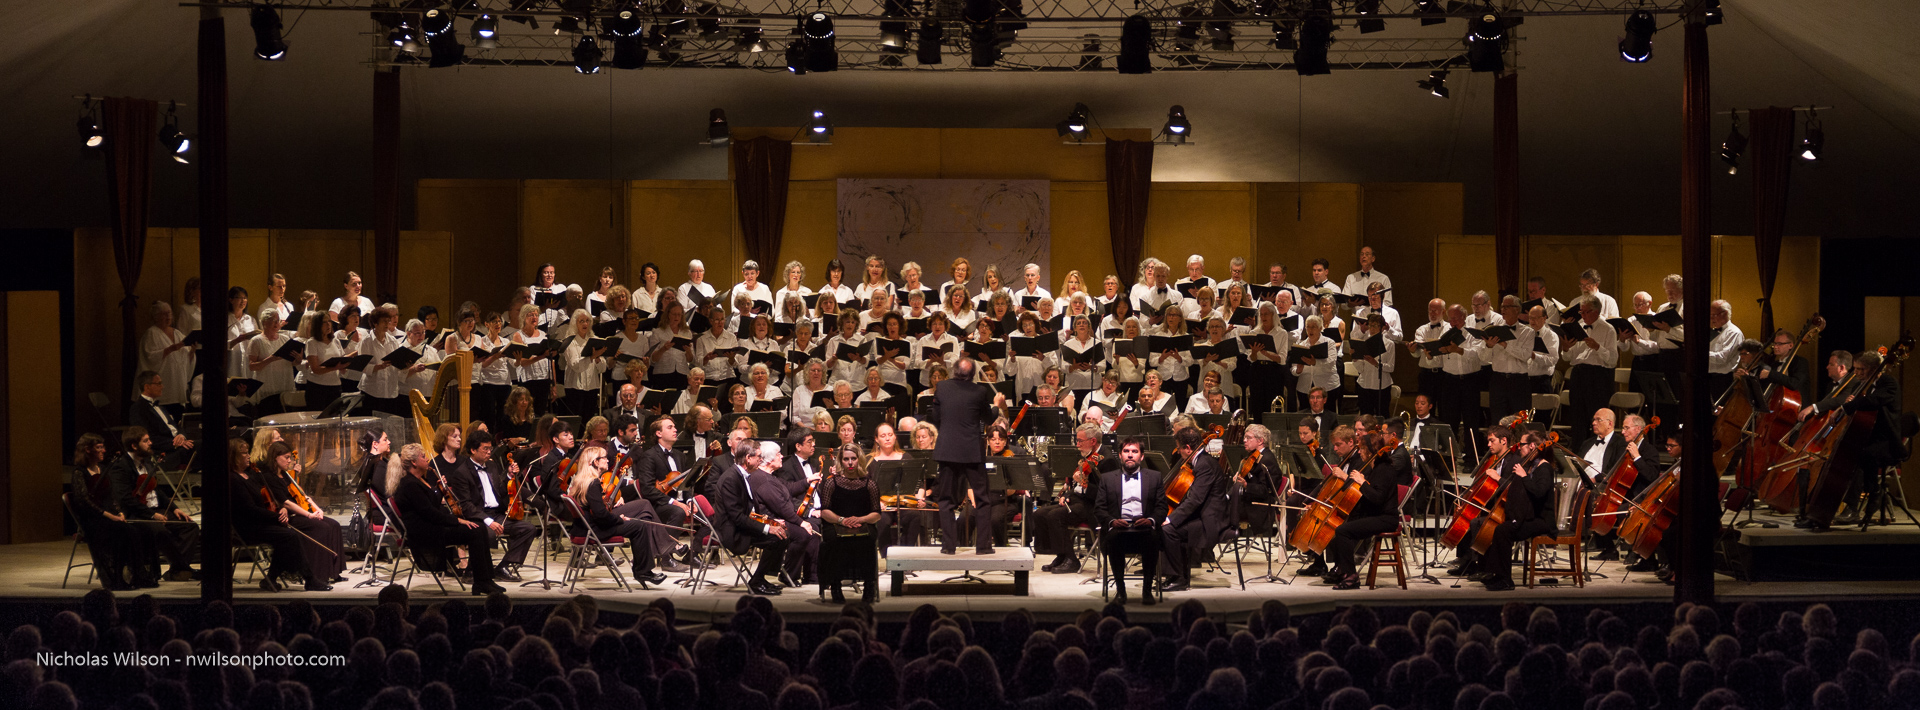 Panorama view of the full MMF Orchestra and Chorus performing the Brahms "German Requeim" with 220 people on stage and 800 in the house.